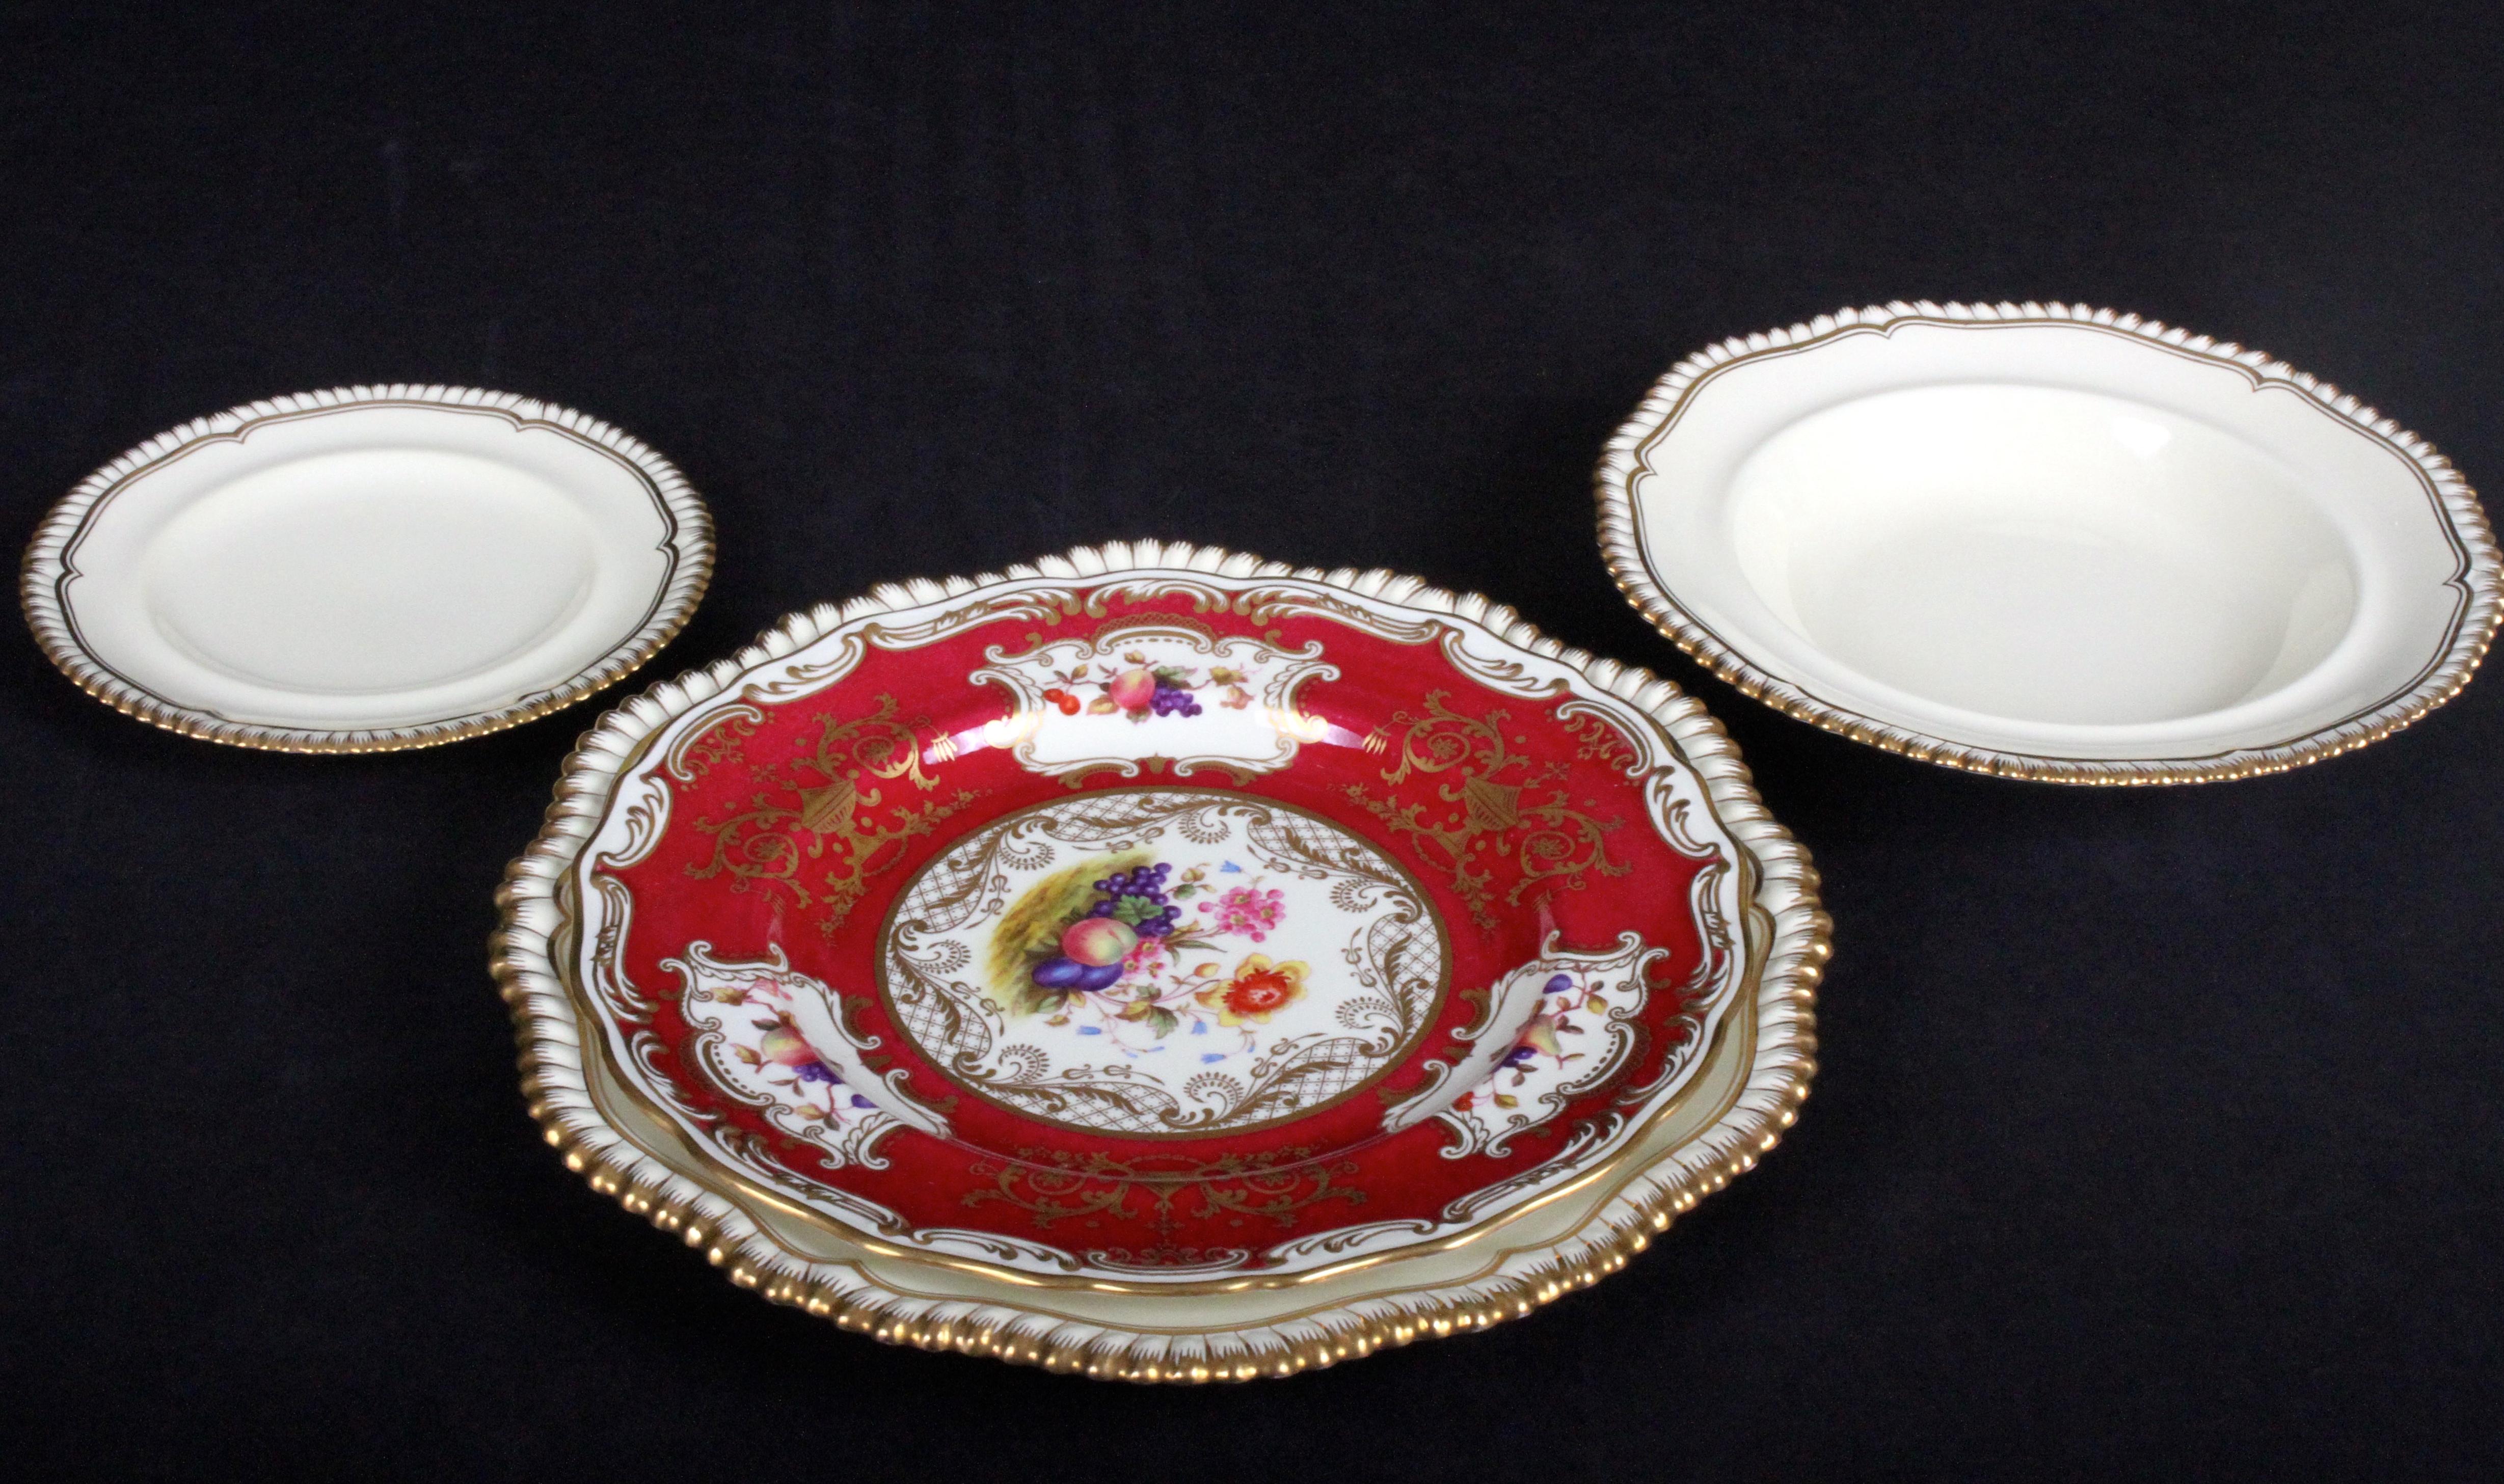 Assembled Service of Spode-Copeland for Tiffany Plates, signed A.Ball  In Good Condition For Sale In New York, NY